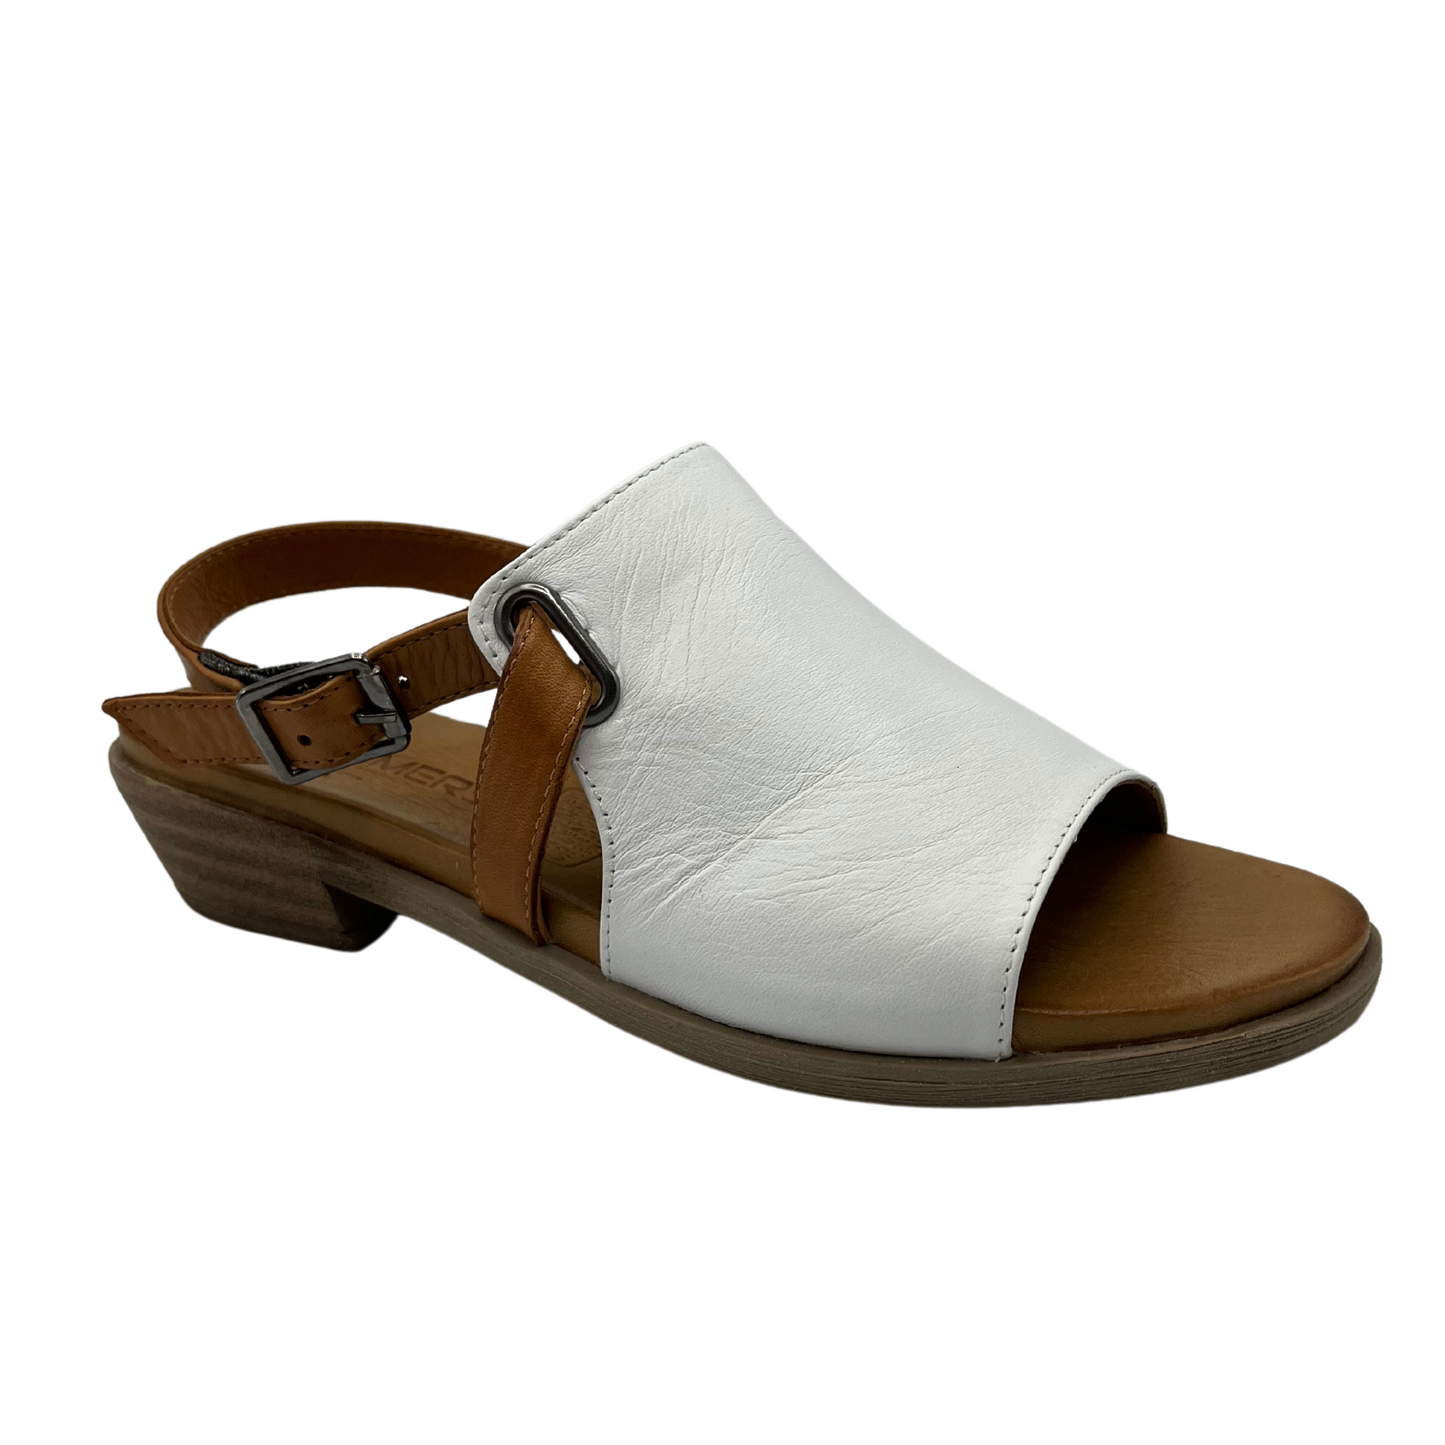 45 degree angled view of white leather sandal with open toe and brown ankle strap